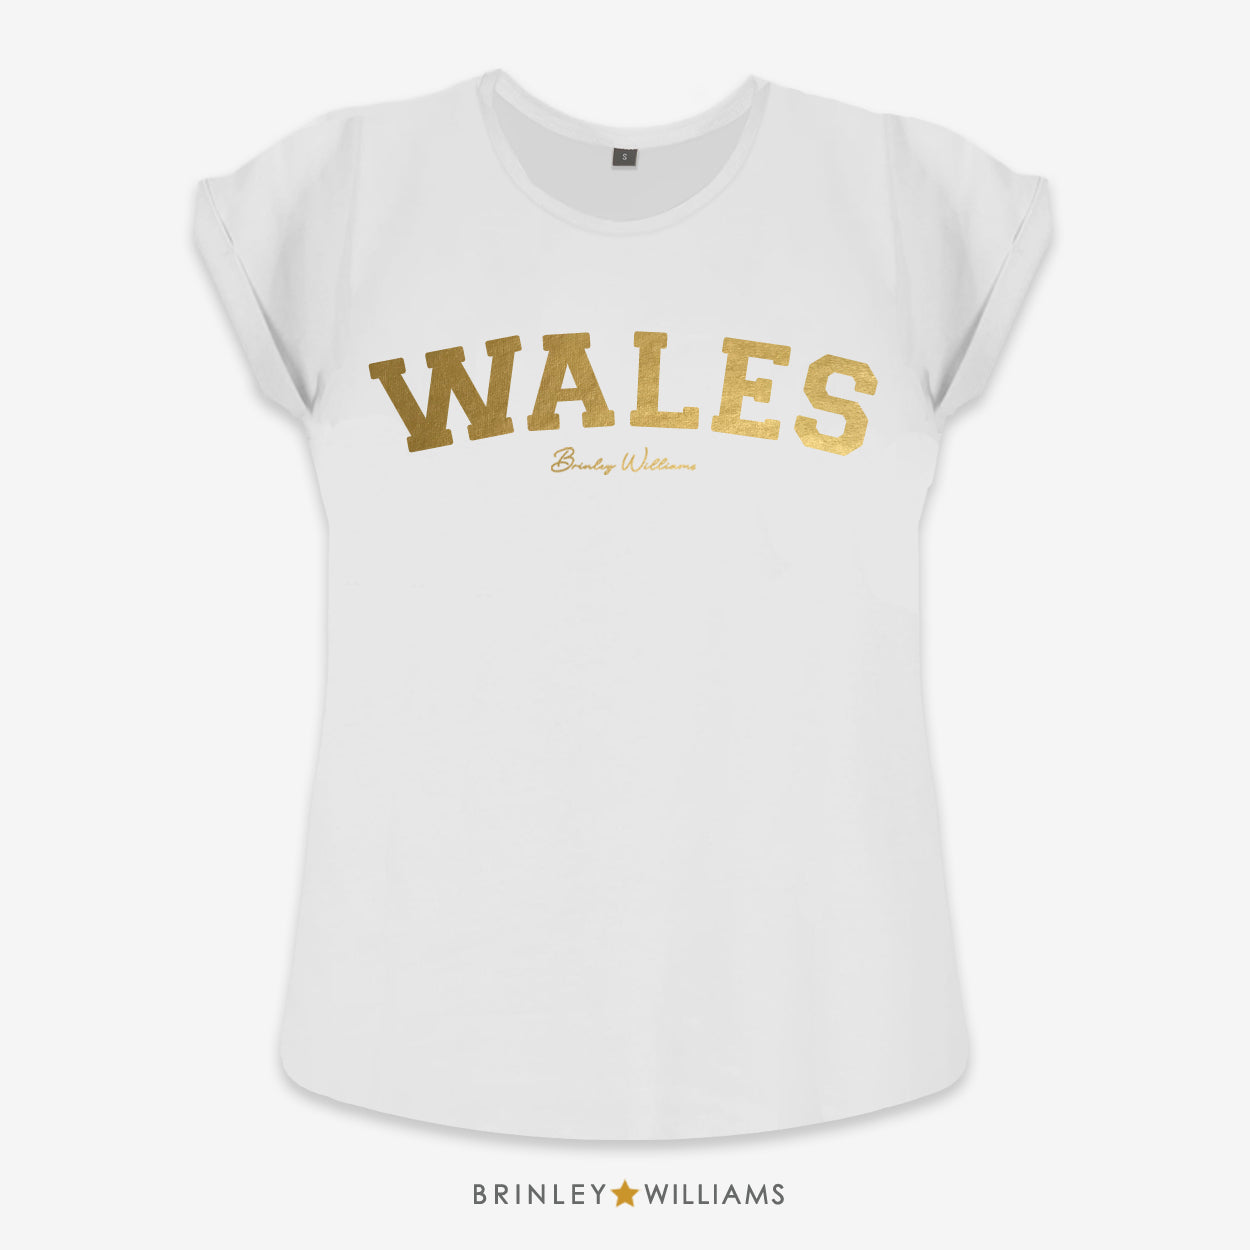 Wales Rolled Sleeve T-shirt - White